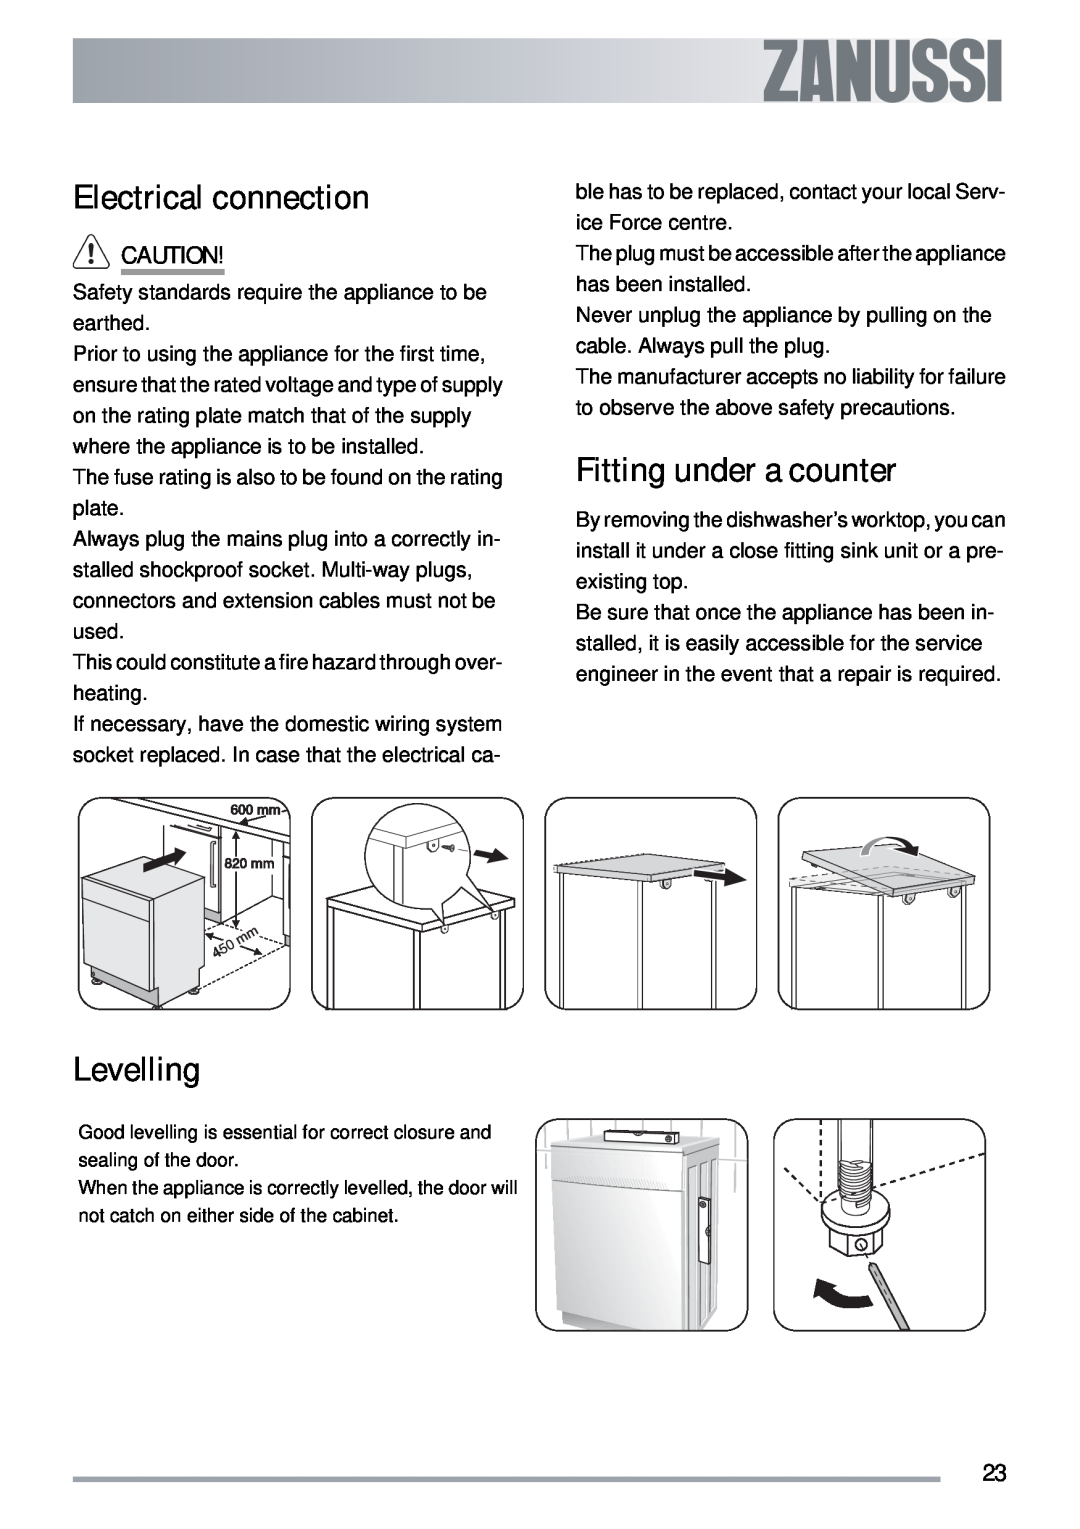 Zanussi ZSF 4143 user manual Electrical connection, Levelling, Fitting under a counter 